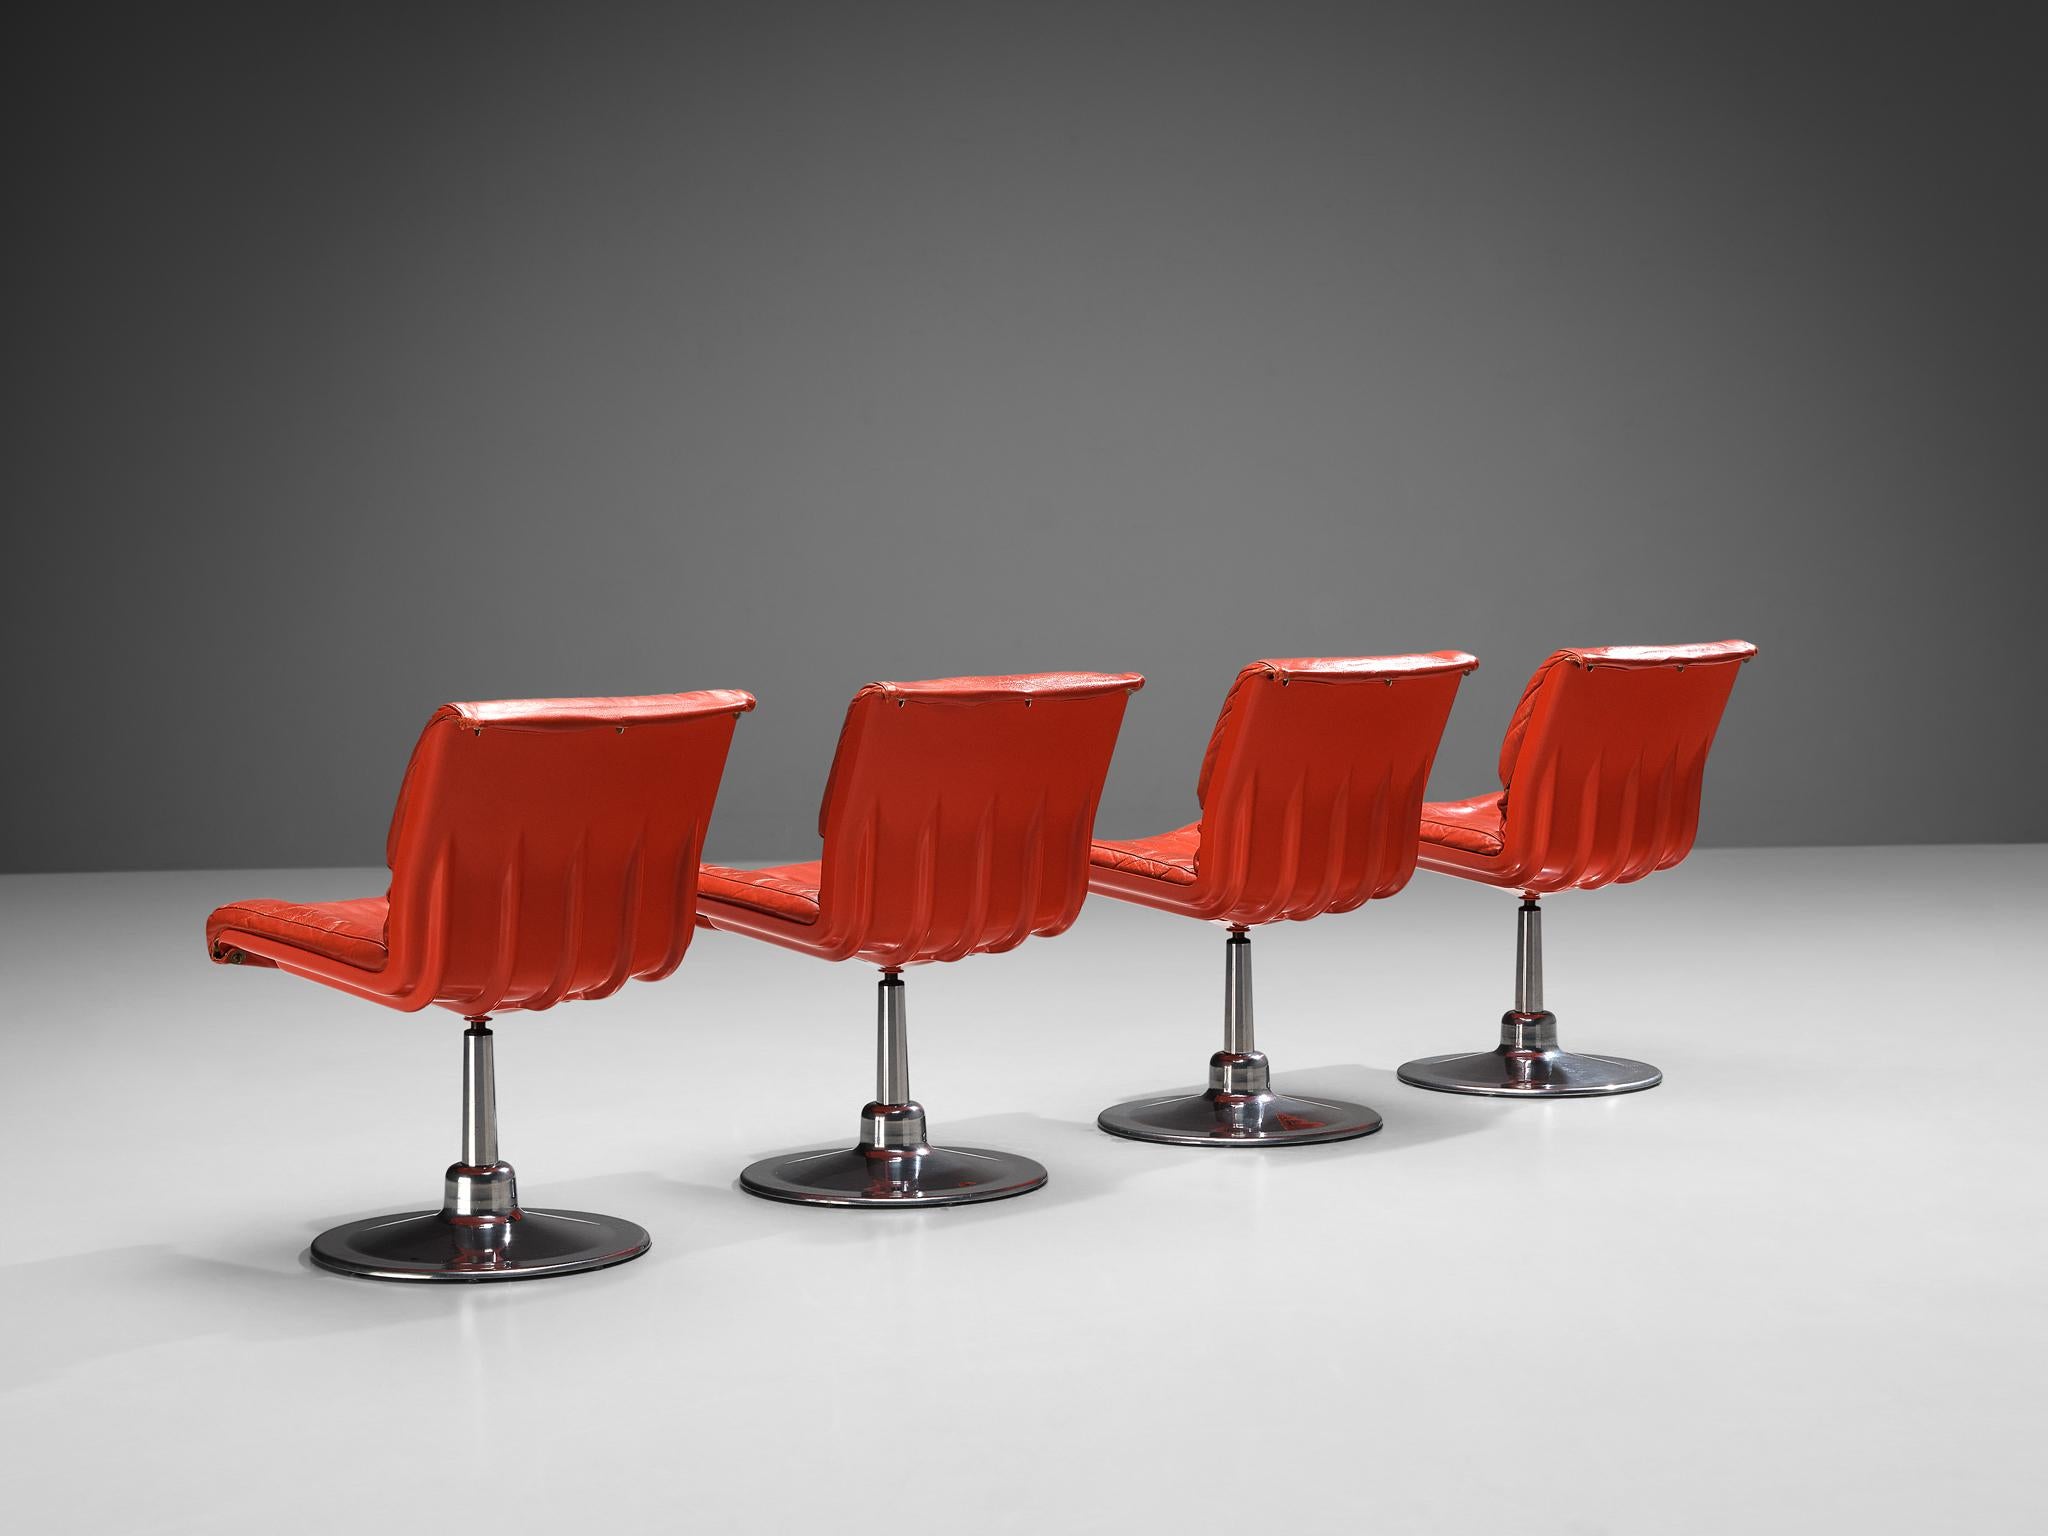 Yrjö Kukkapuro for Haimi Finland, set of four dining chairs, leather, fiberglass, aluminum, Finland, 1960s

These chairs are designed by the Finnish artist Yrjö Kukkapuro. This model consists of a molded fiberglass shell executed in a bright red